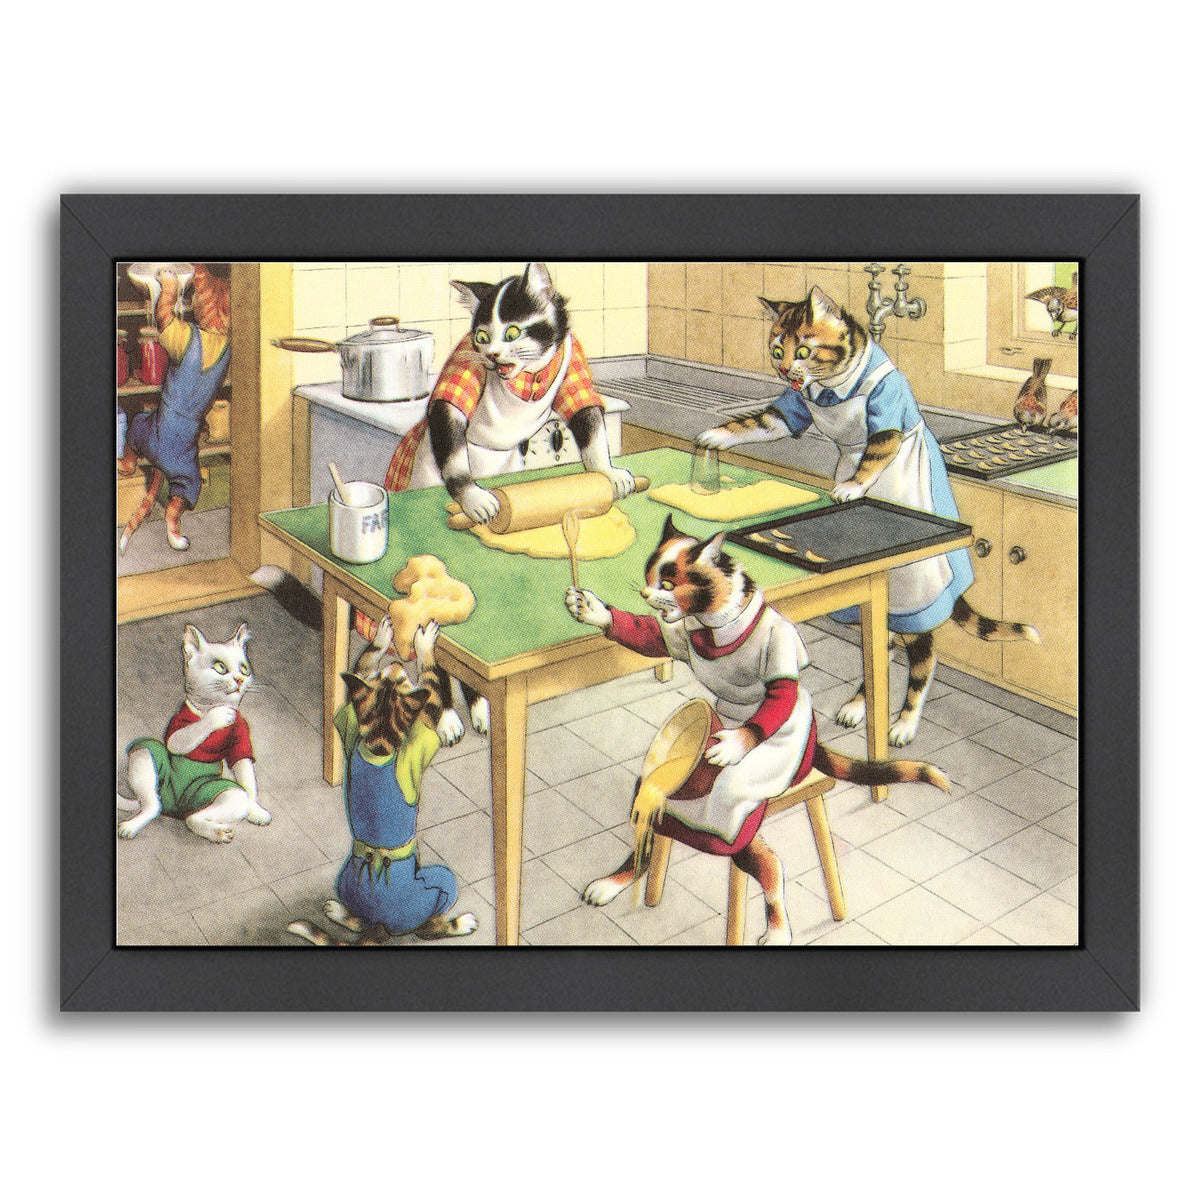 Cooking With The Crazy Cats Family by Found Image Press Framed Print - Americanflat